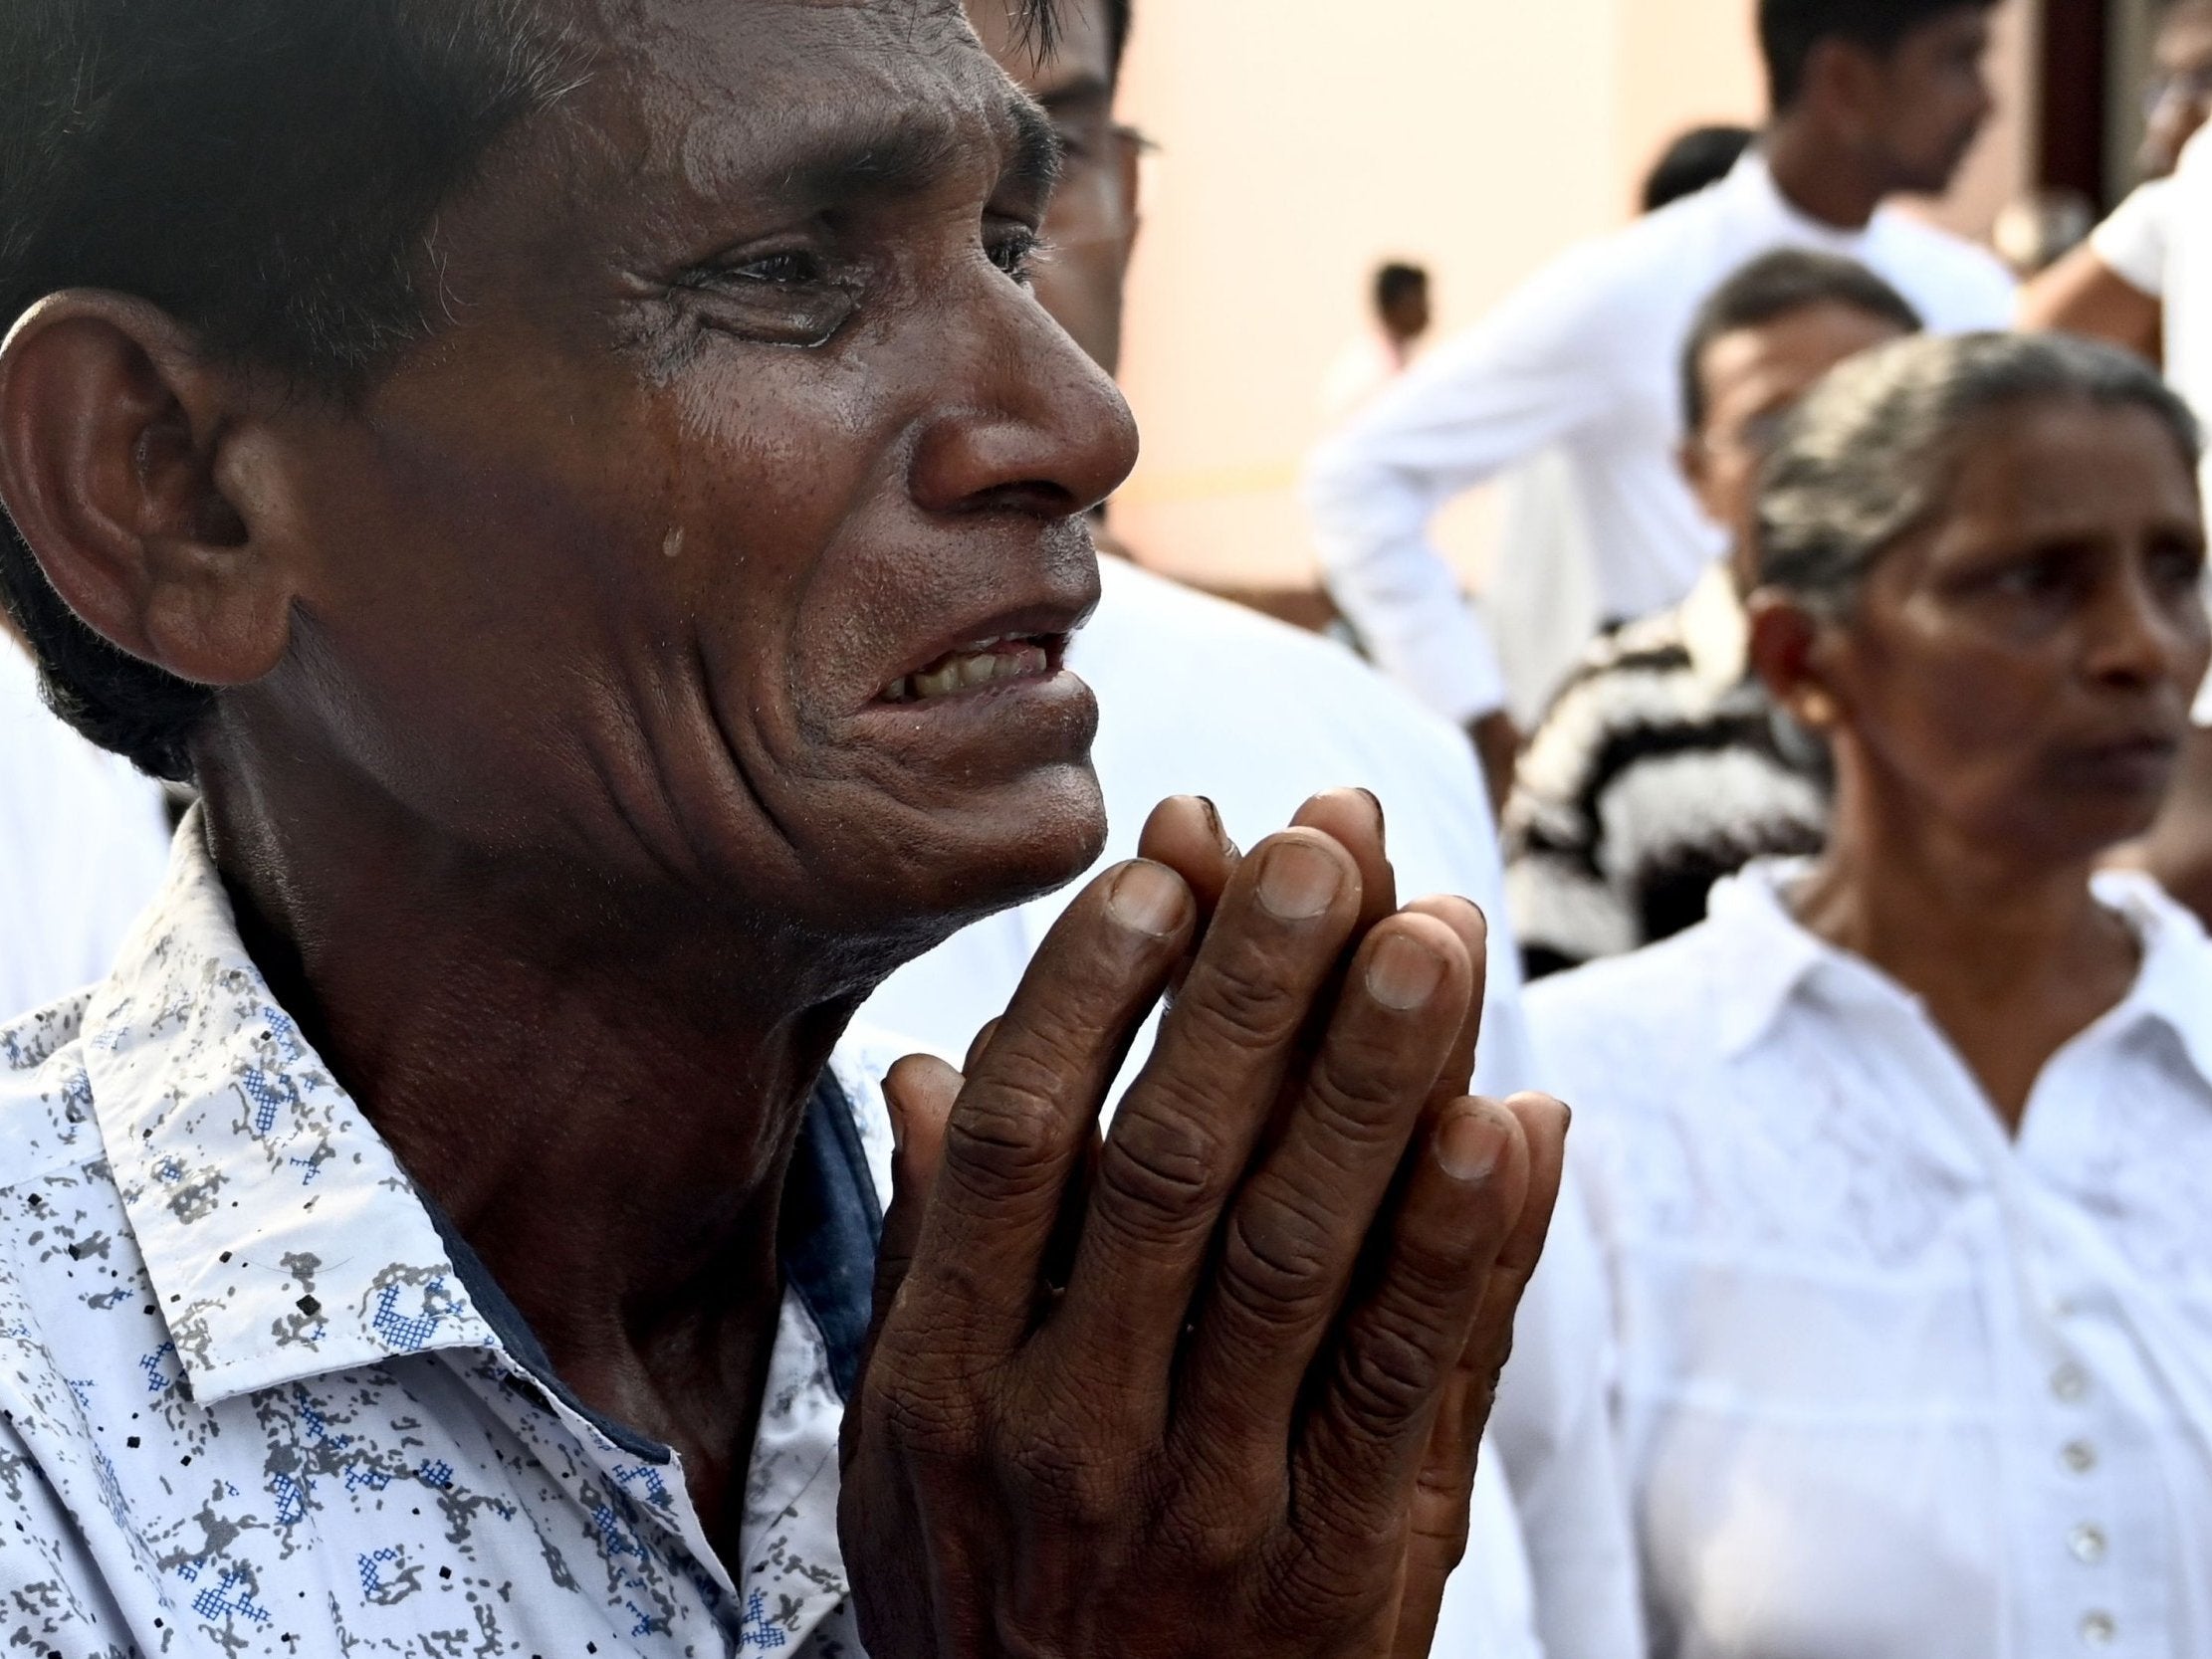 A man weeps during the service for a victim at St Sebastian’s Church yesterday